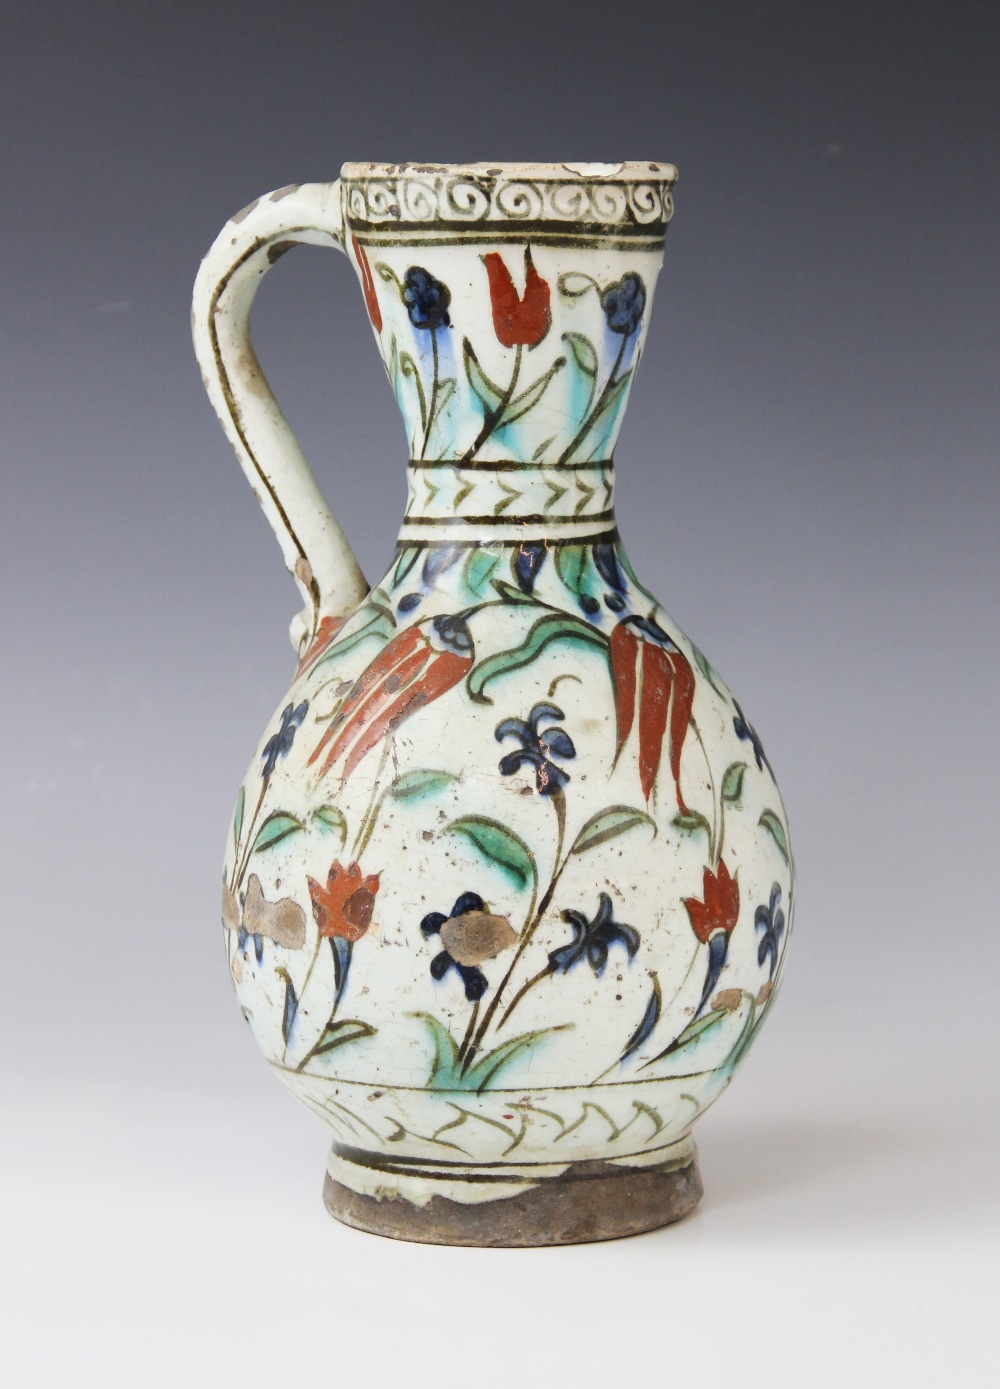 An Ottoman Empire Turkish polychrome pottery jug, of pear shape with attached handle and flared